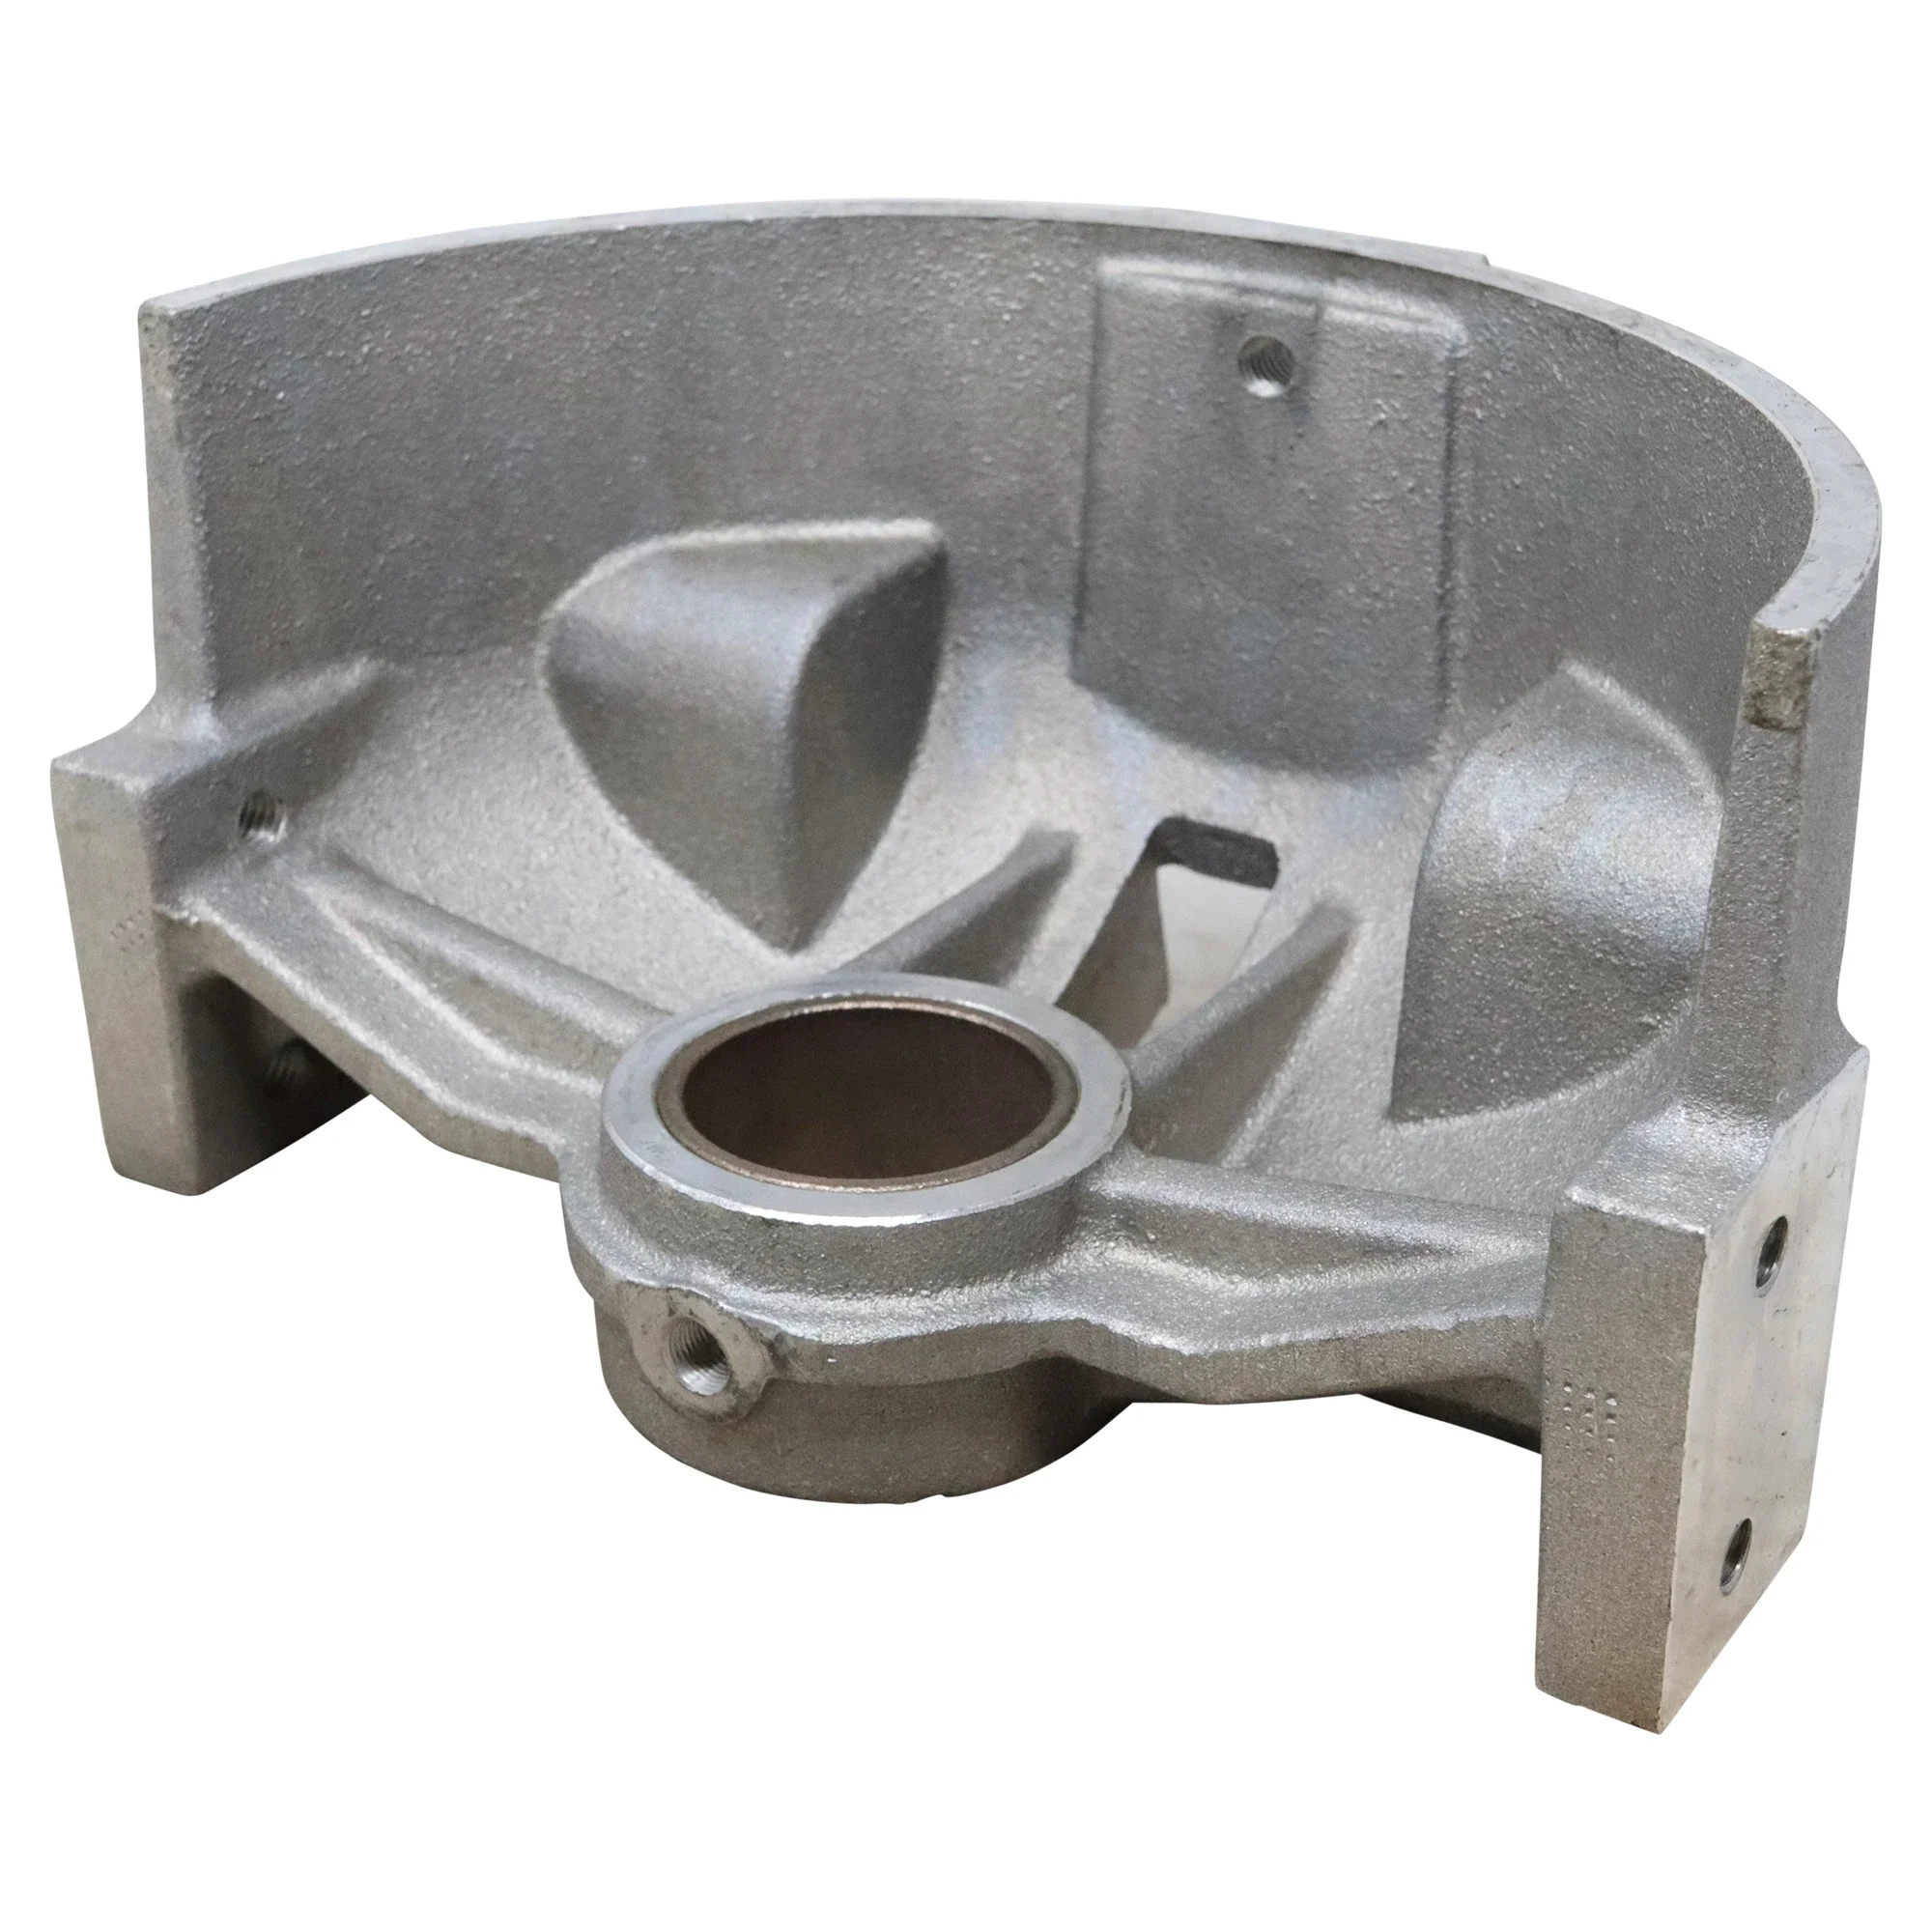 Wastebuilt® Replacement for Leach Bearing Leg